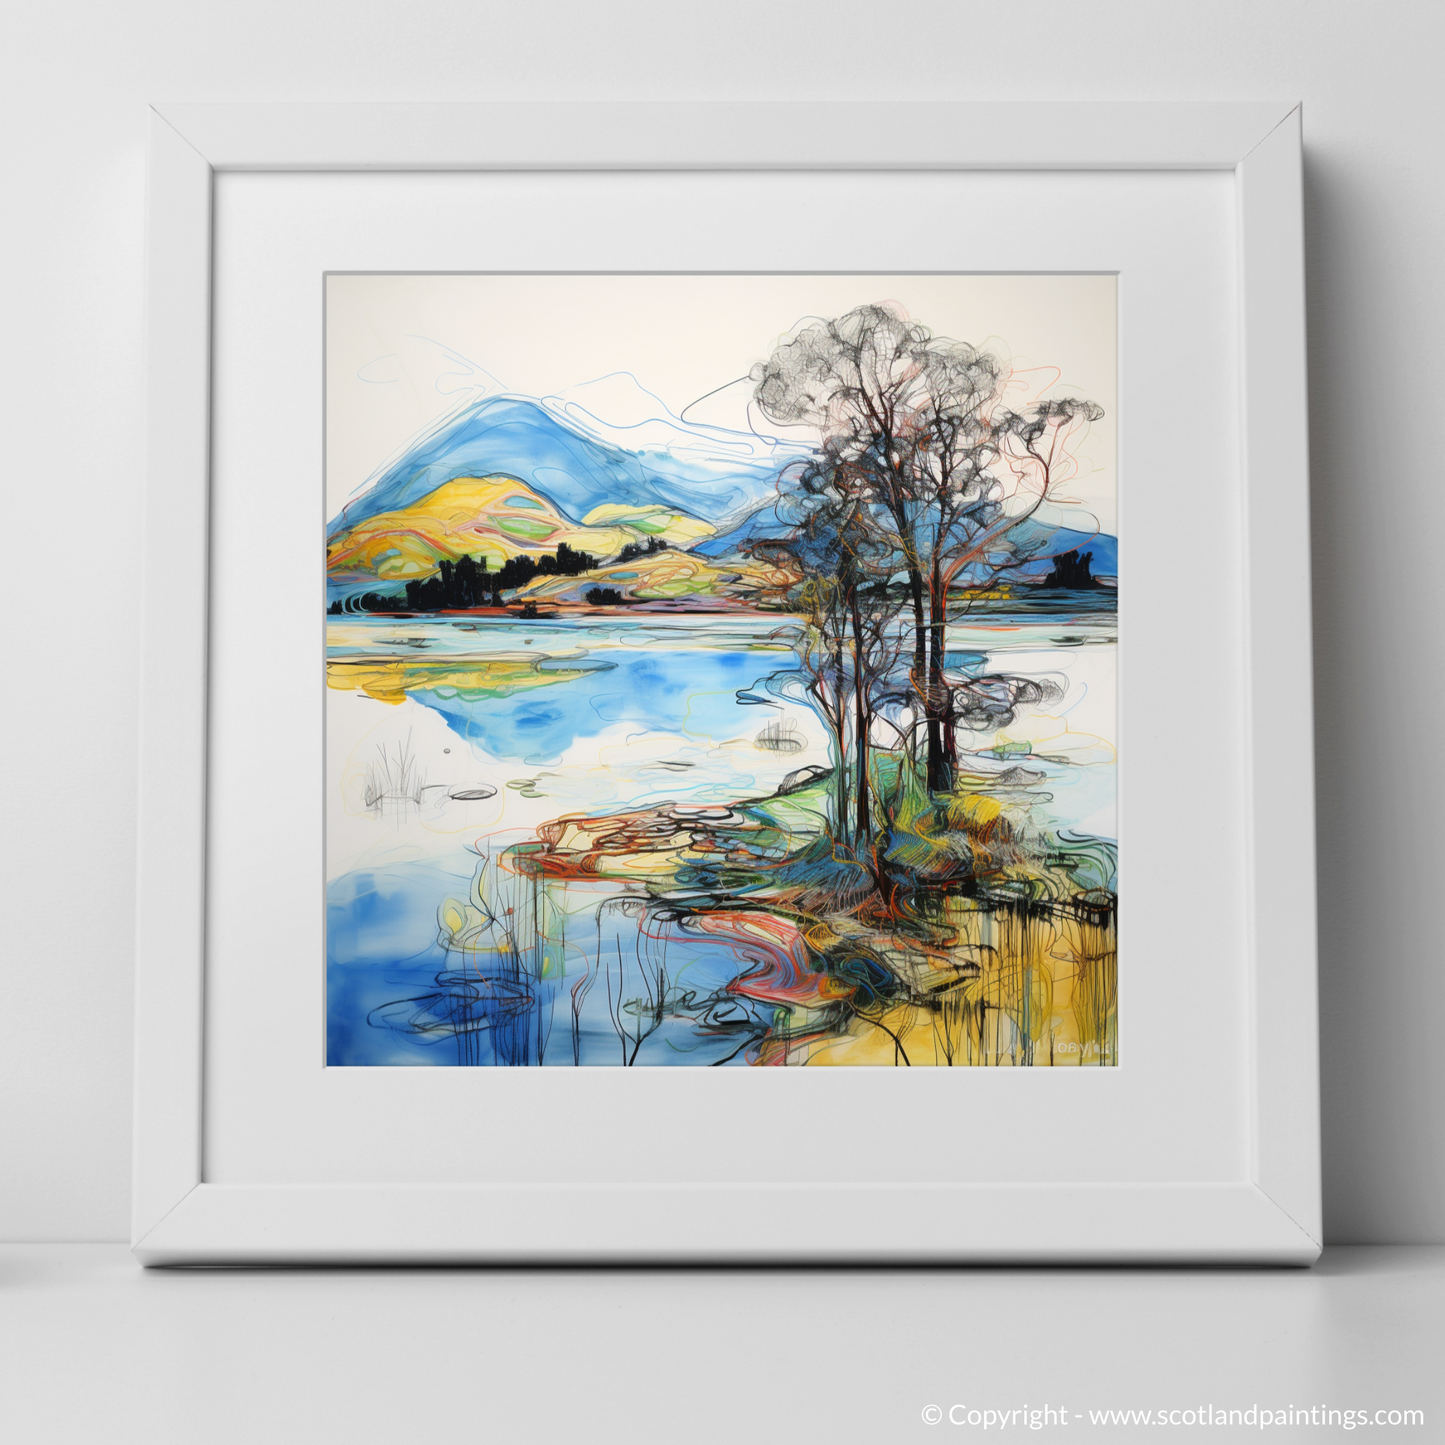 Art Print of Loch Awe with a white frame